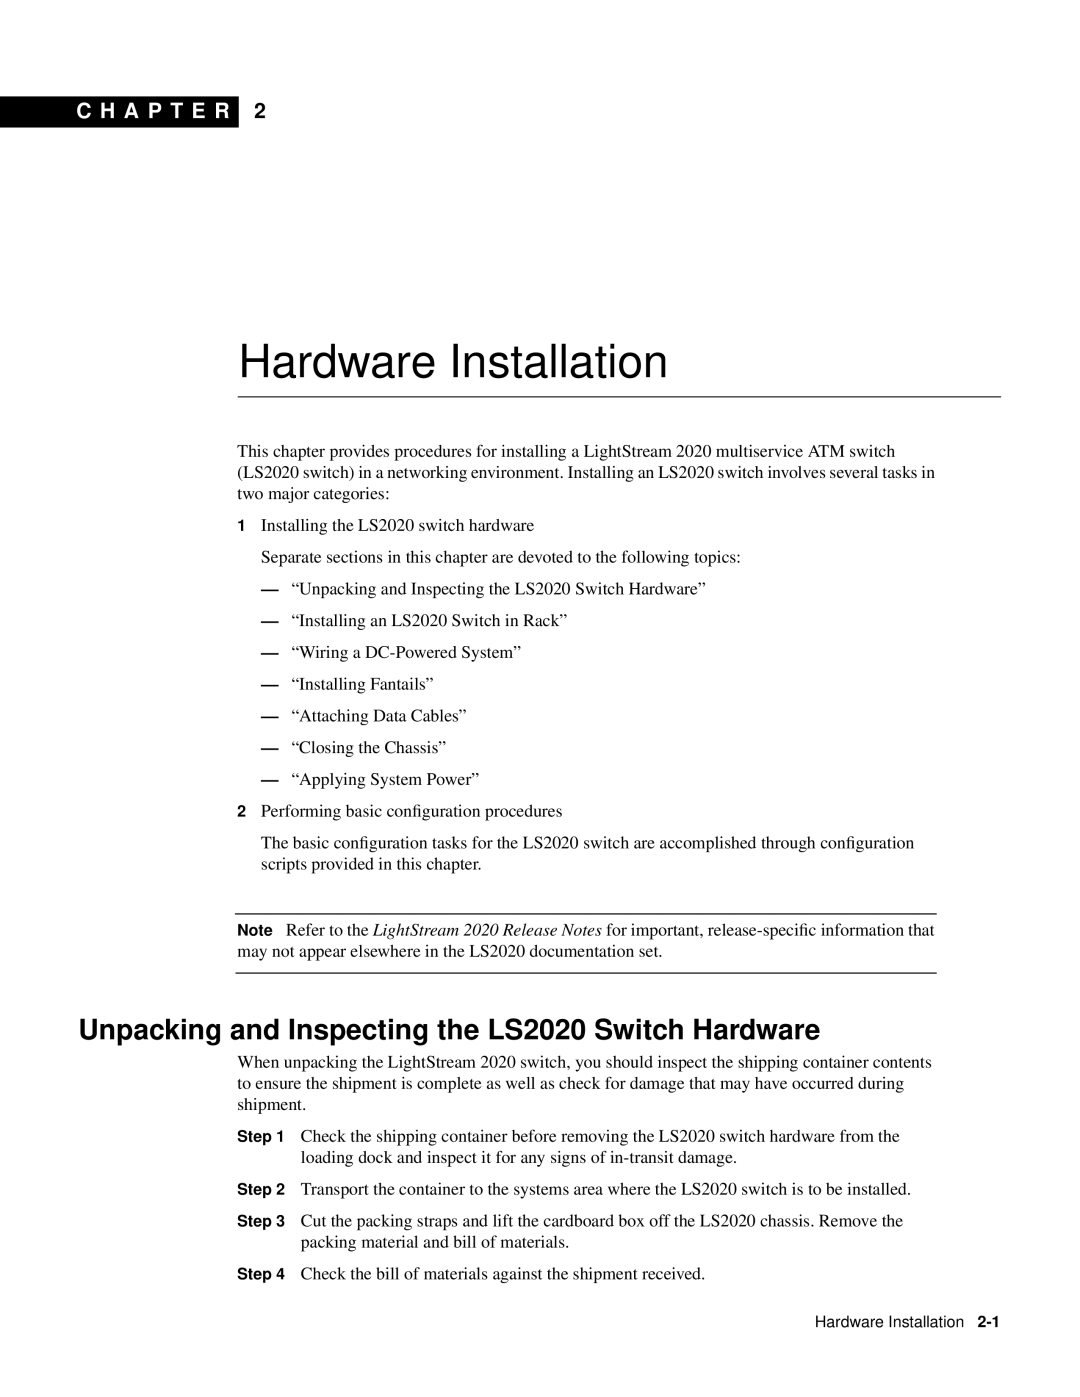 Cisco Systems manual Unpacking and Inspecting the LS2020 Switch Hardware, Hardware Installation, C H A P T E R 